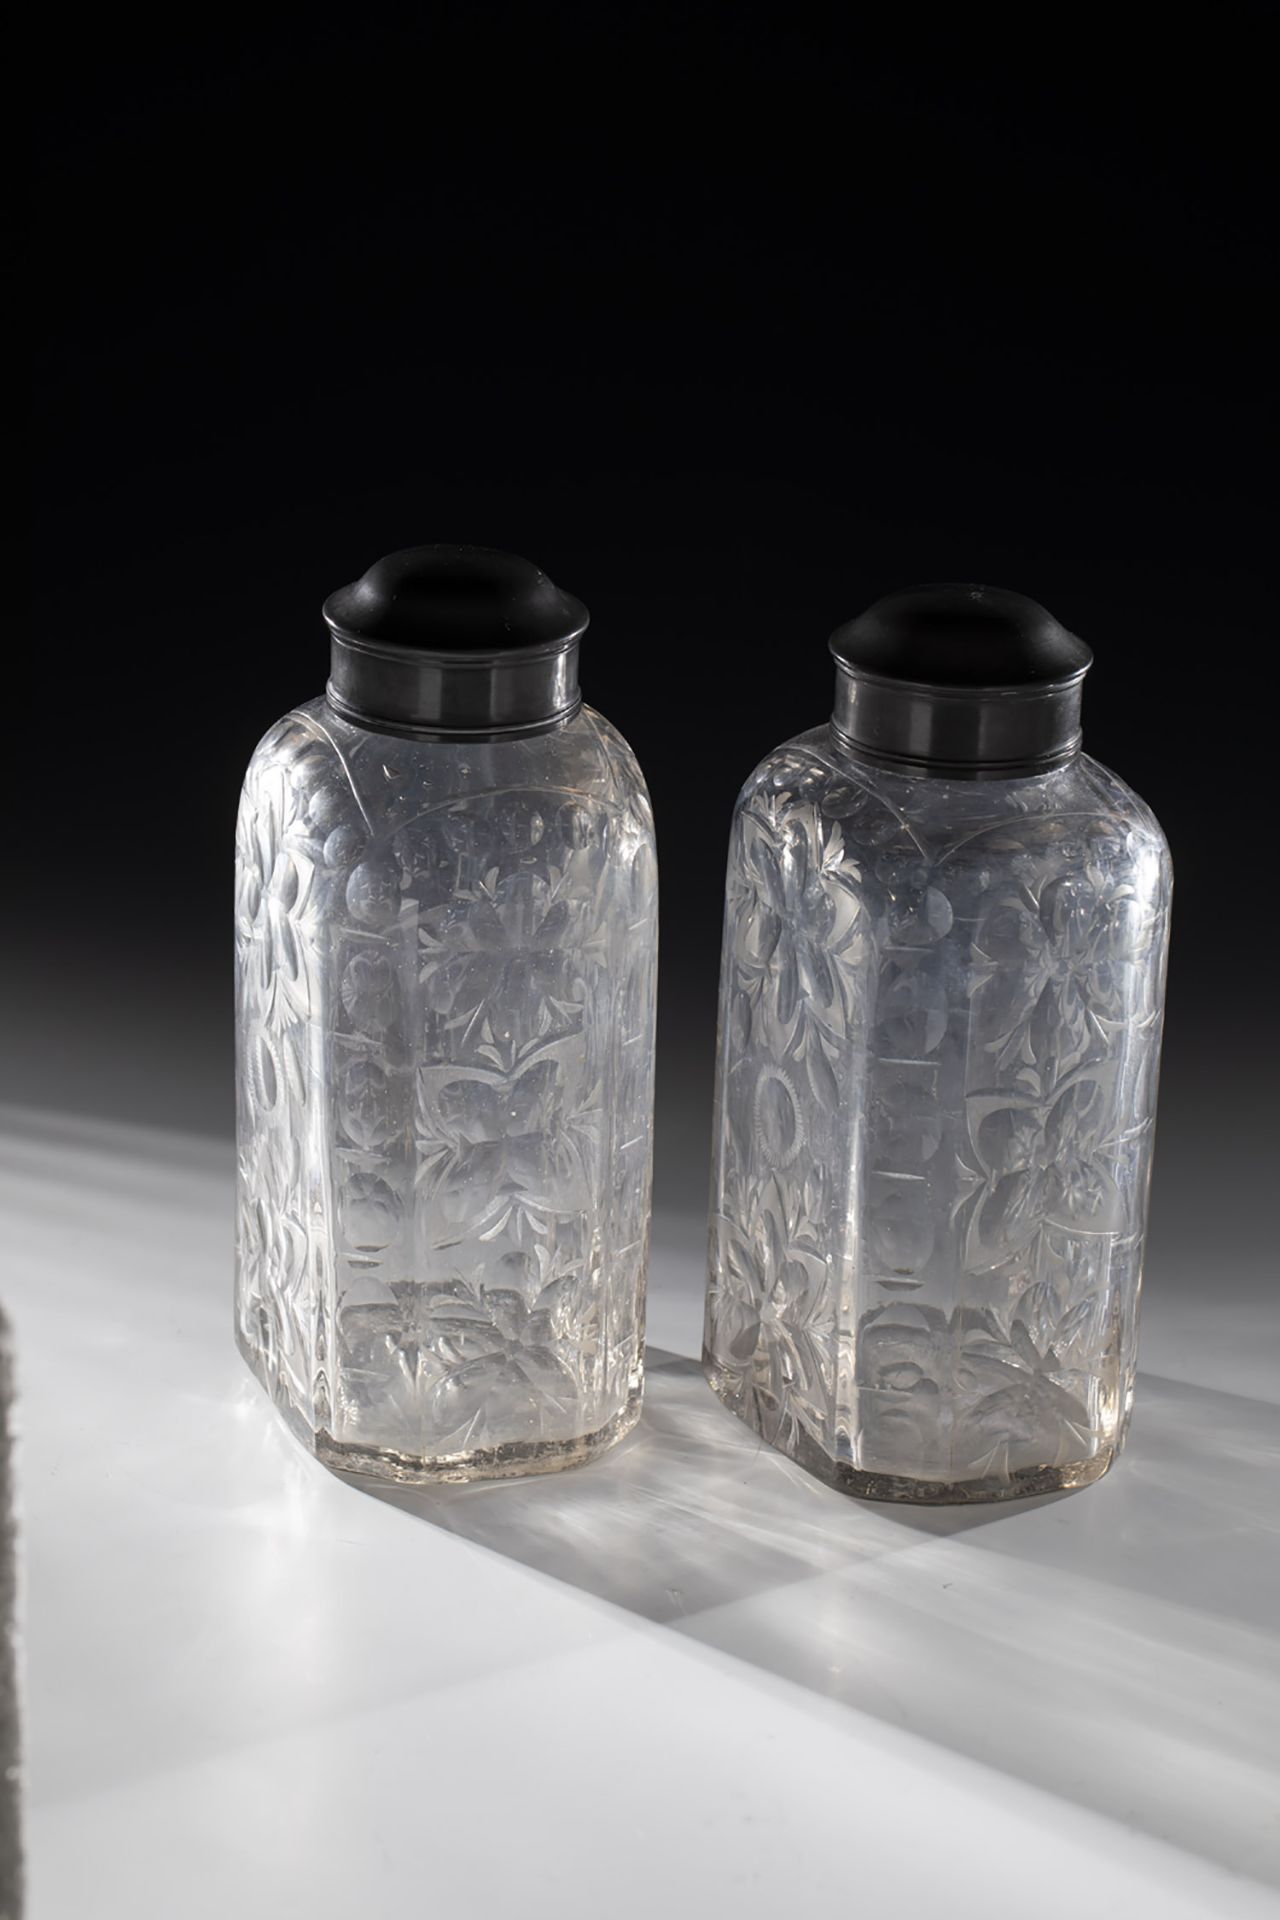 Pair of large bottles with tin screw caps - Image 2 of 2